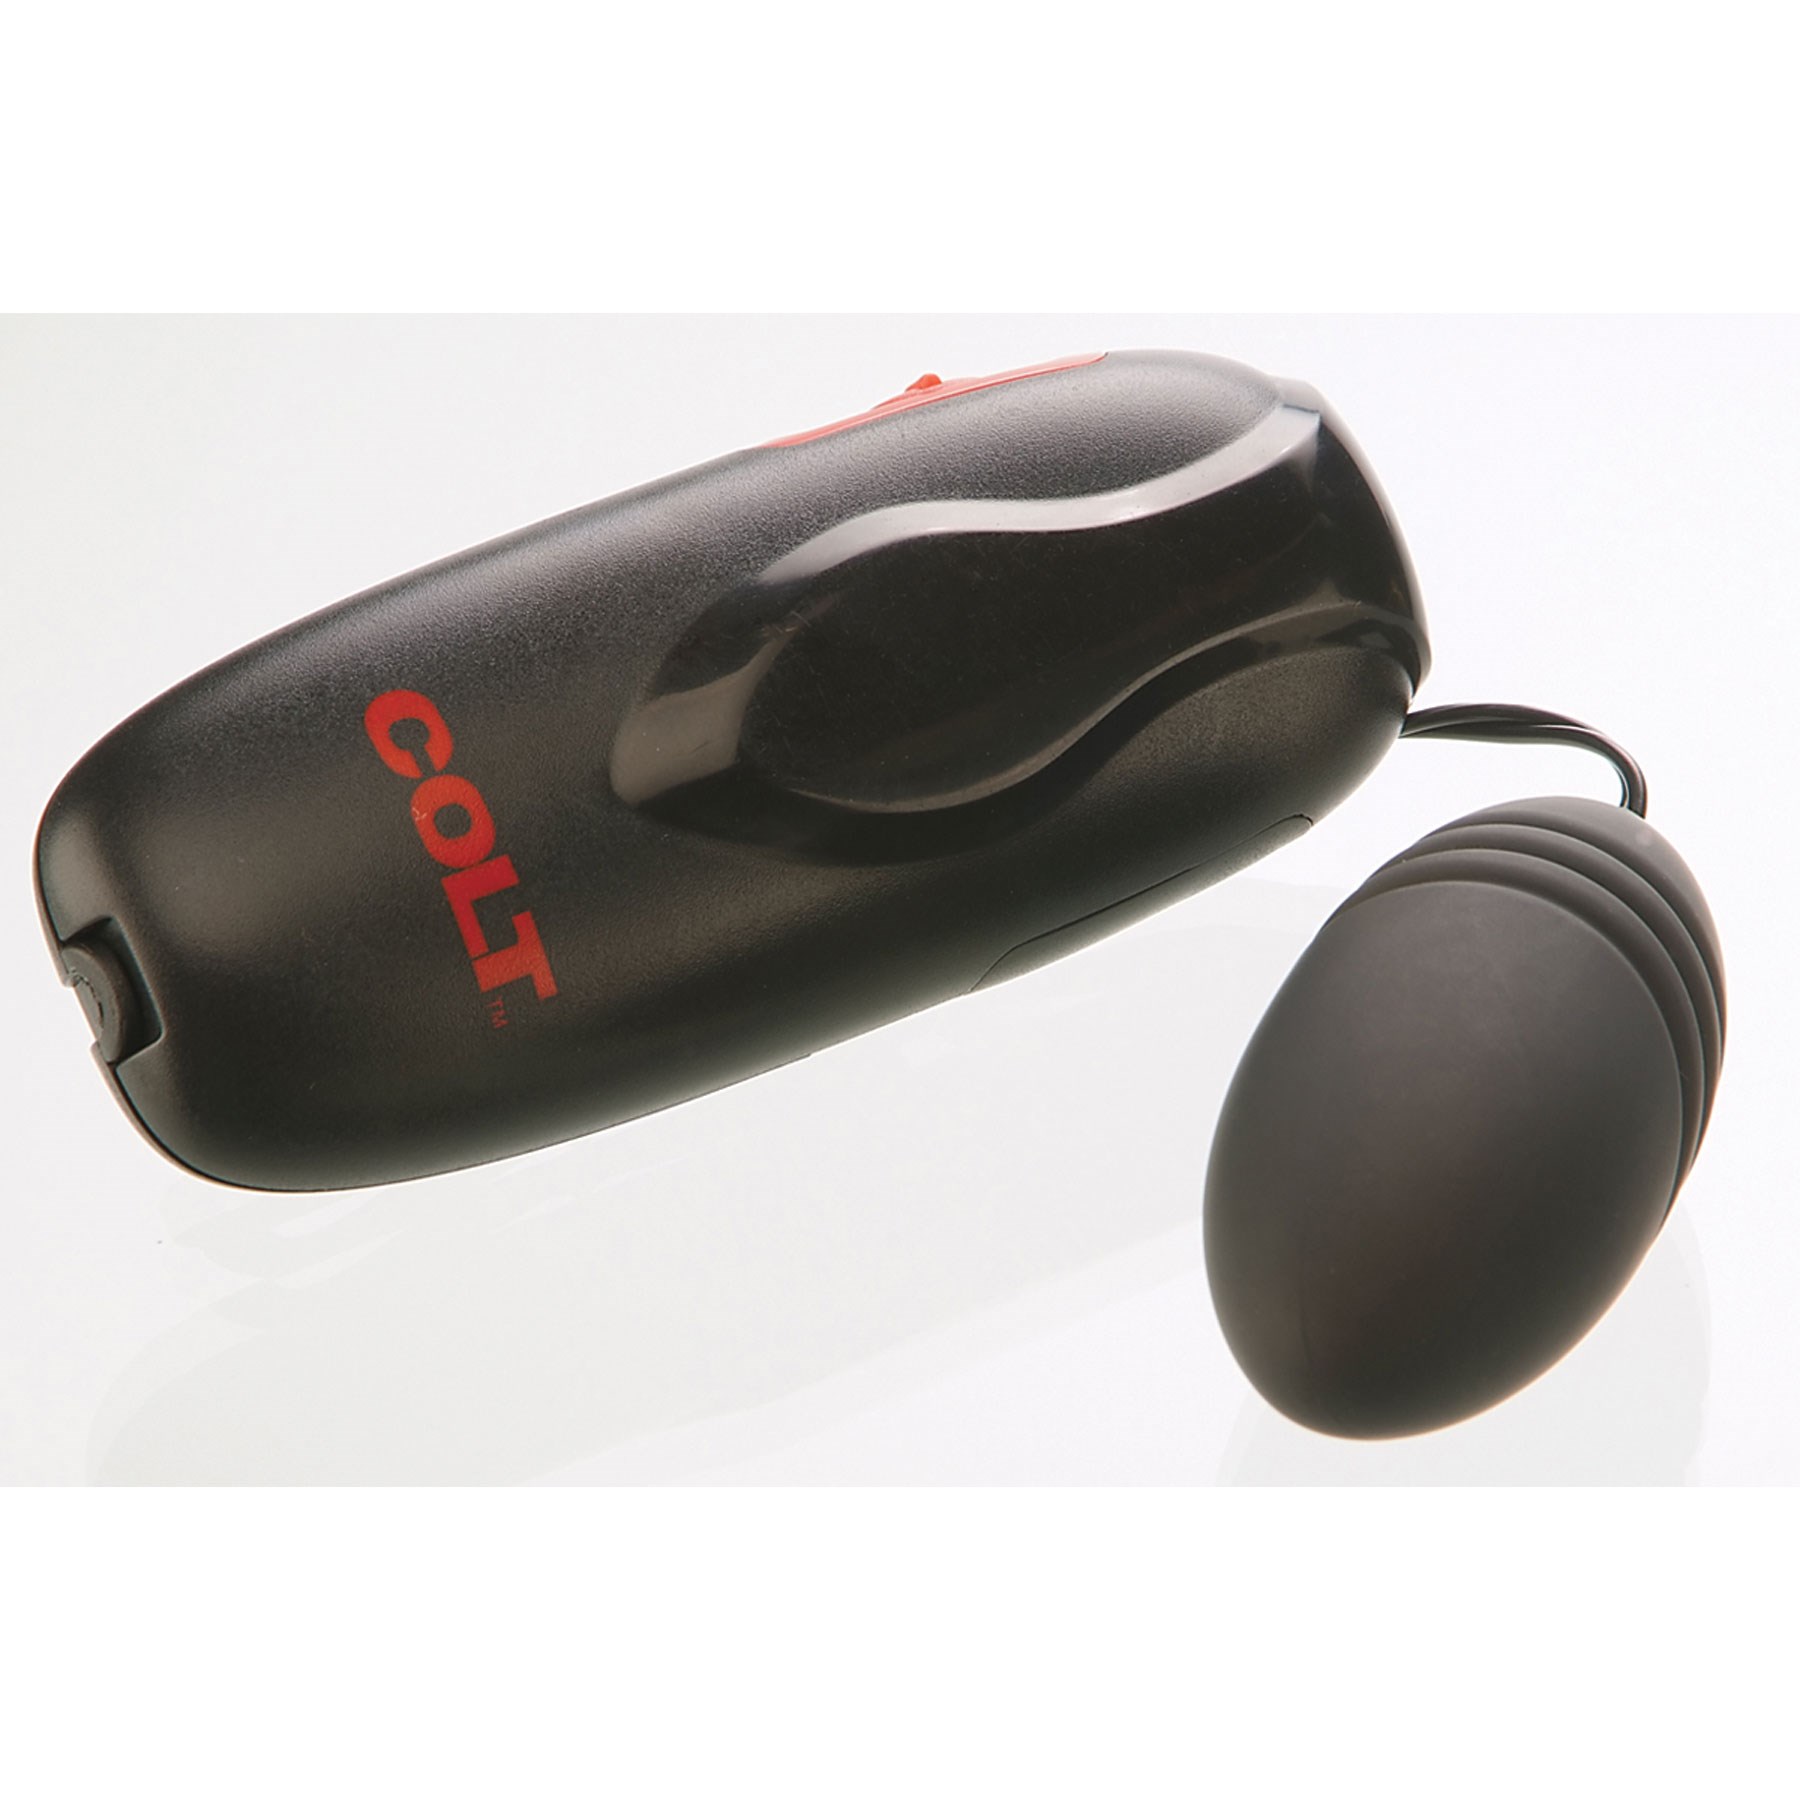 Xtreme Power Turbo Bullet and controller